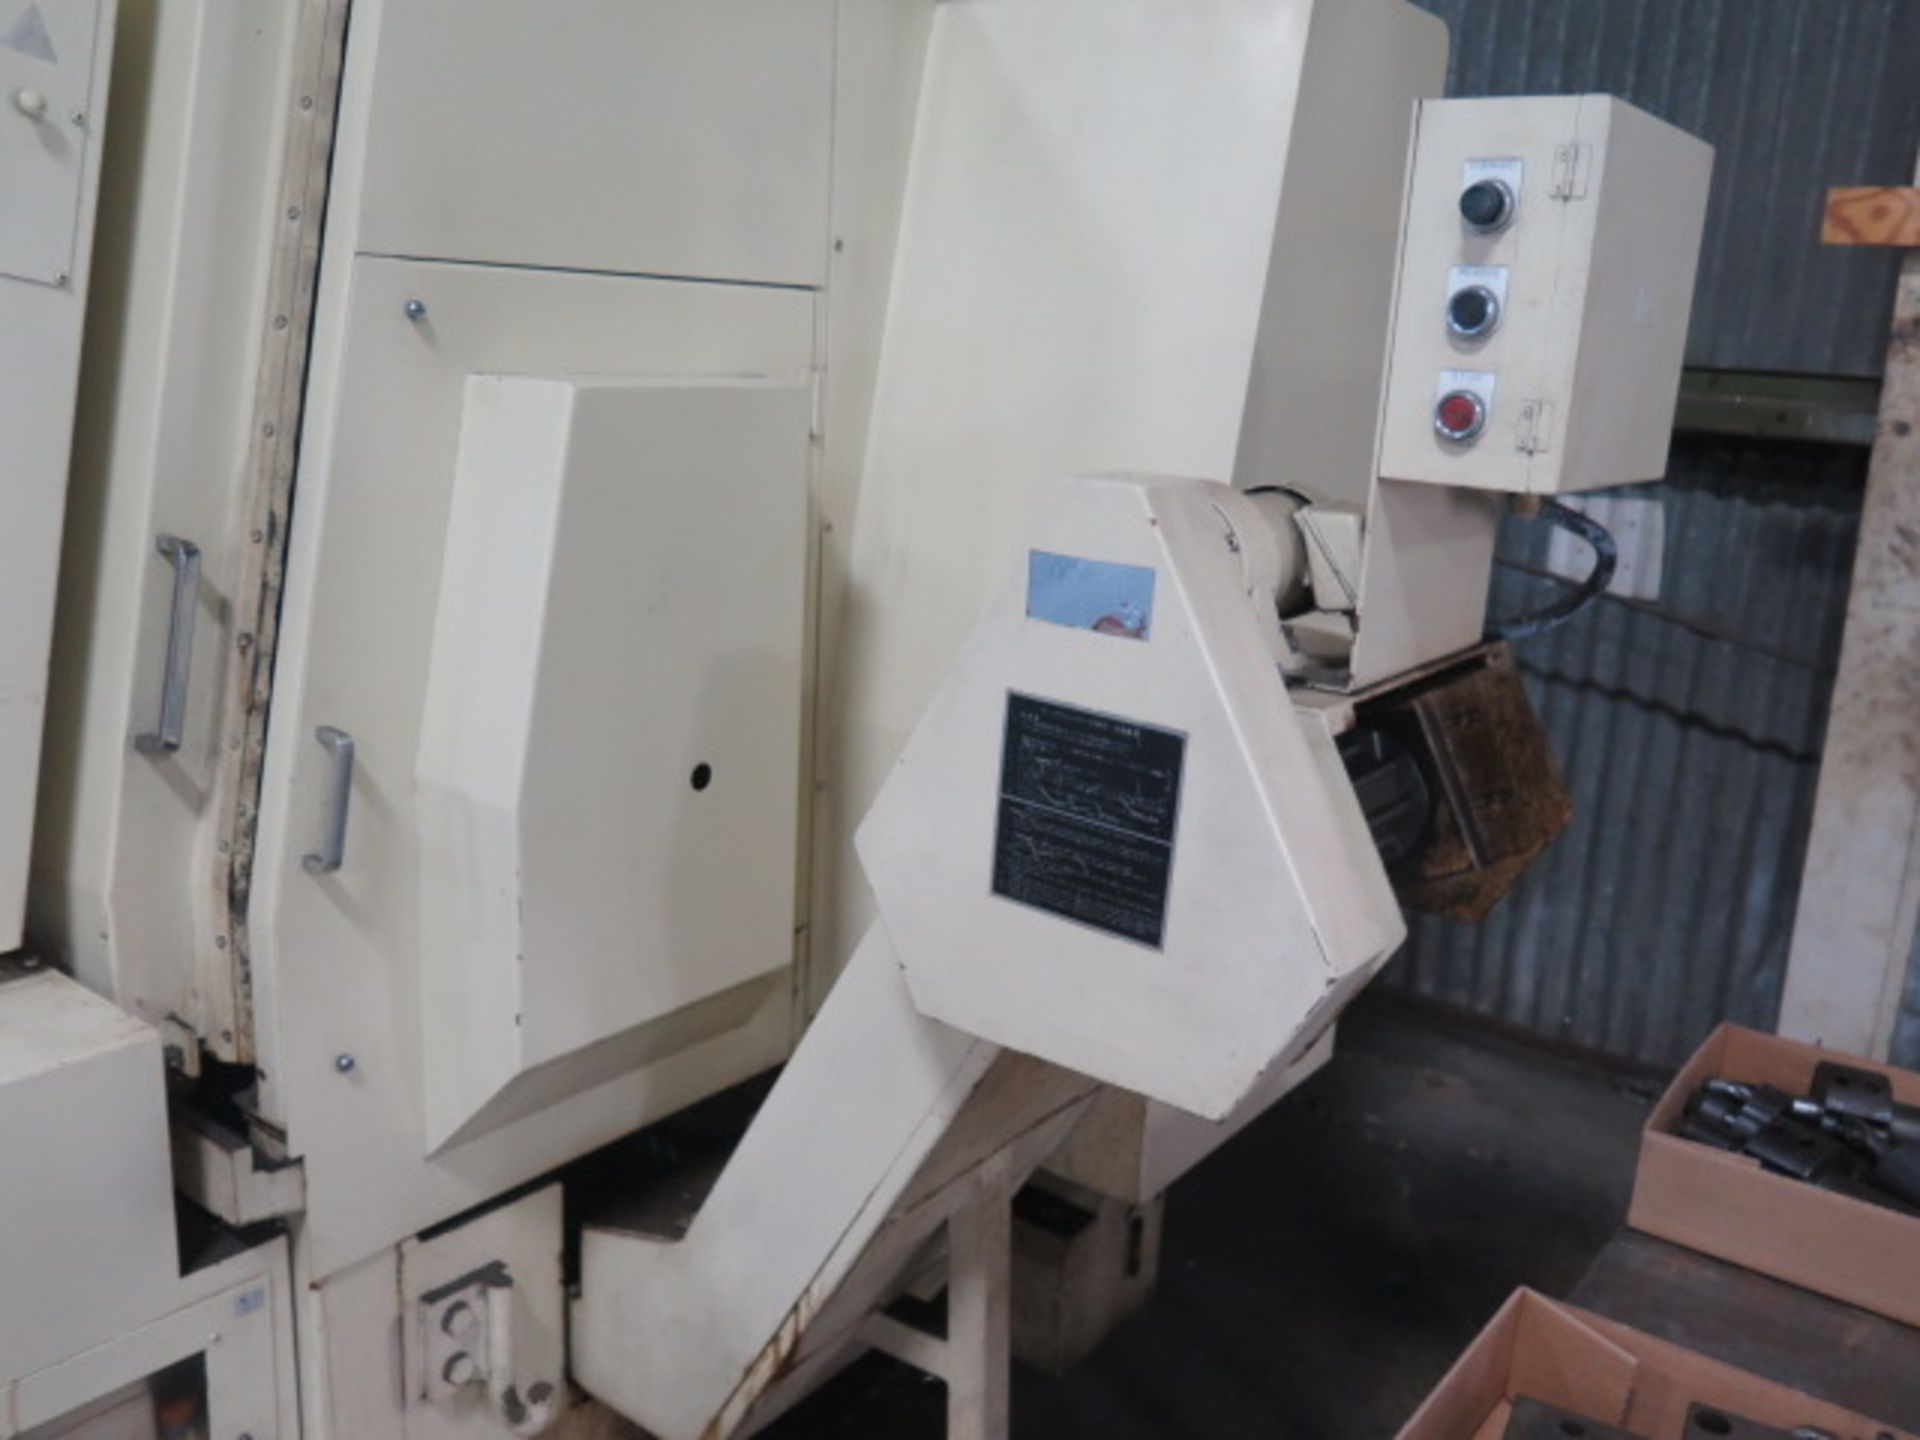 Okuma & Howa ACT 5L CNC Turning Center s/n 19192 w/ Fanuc 0T Controls, 12-Station Turret, SOLD AS IS - Image 11 of 15